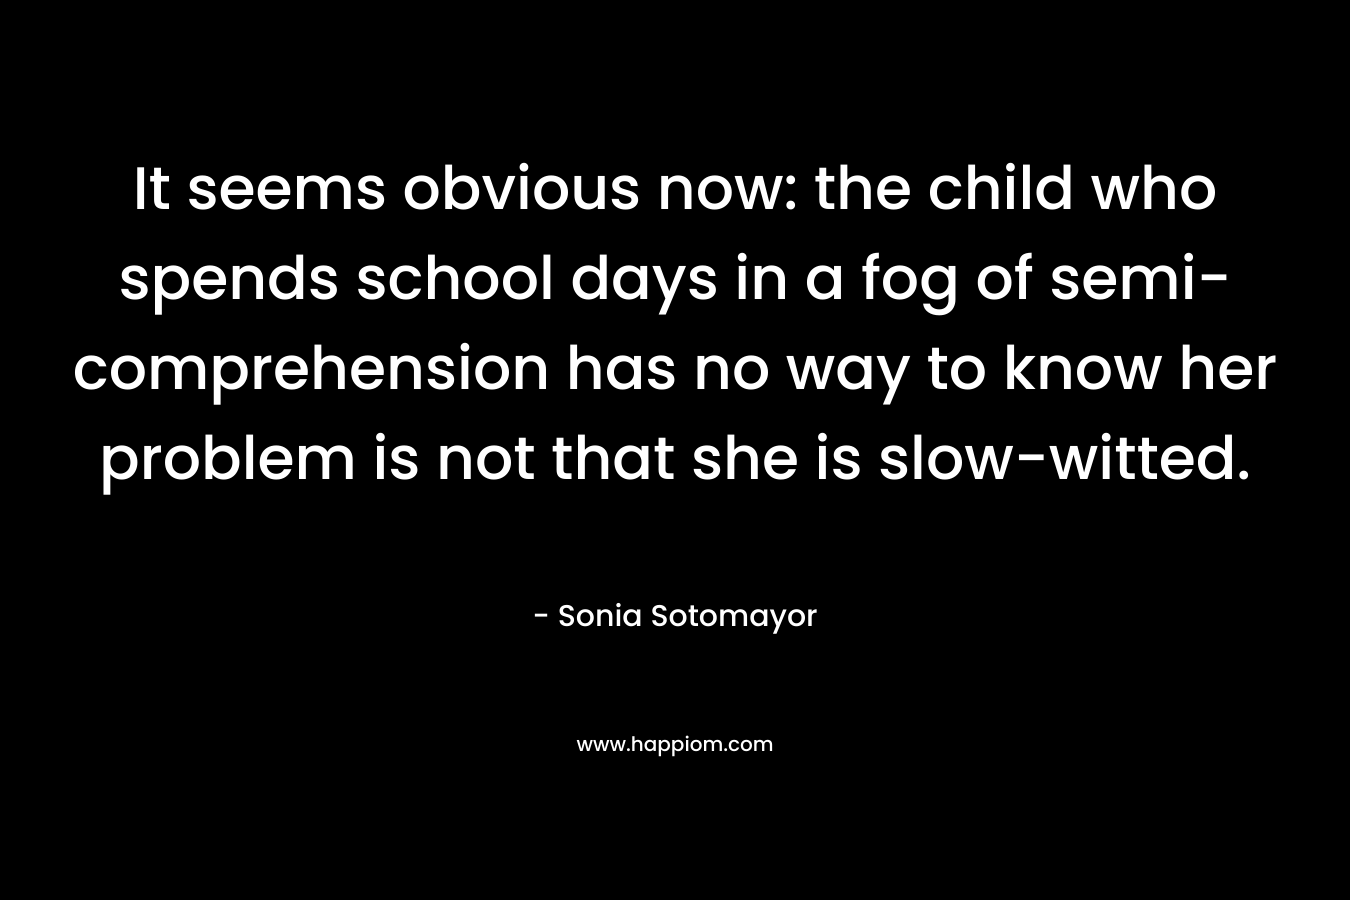 It seems obvious now: the child who spends school days in a fog of semi-comprehension has no way to know her problem is not that she is slow-witted.